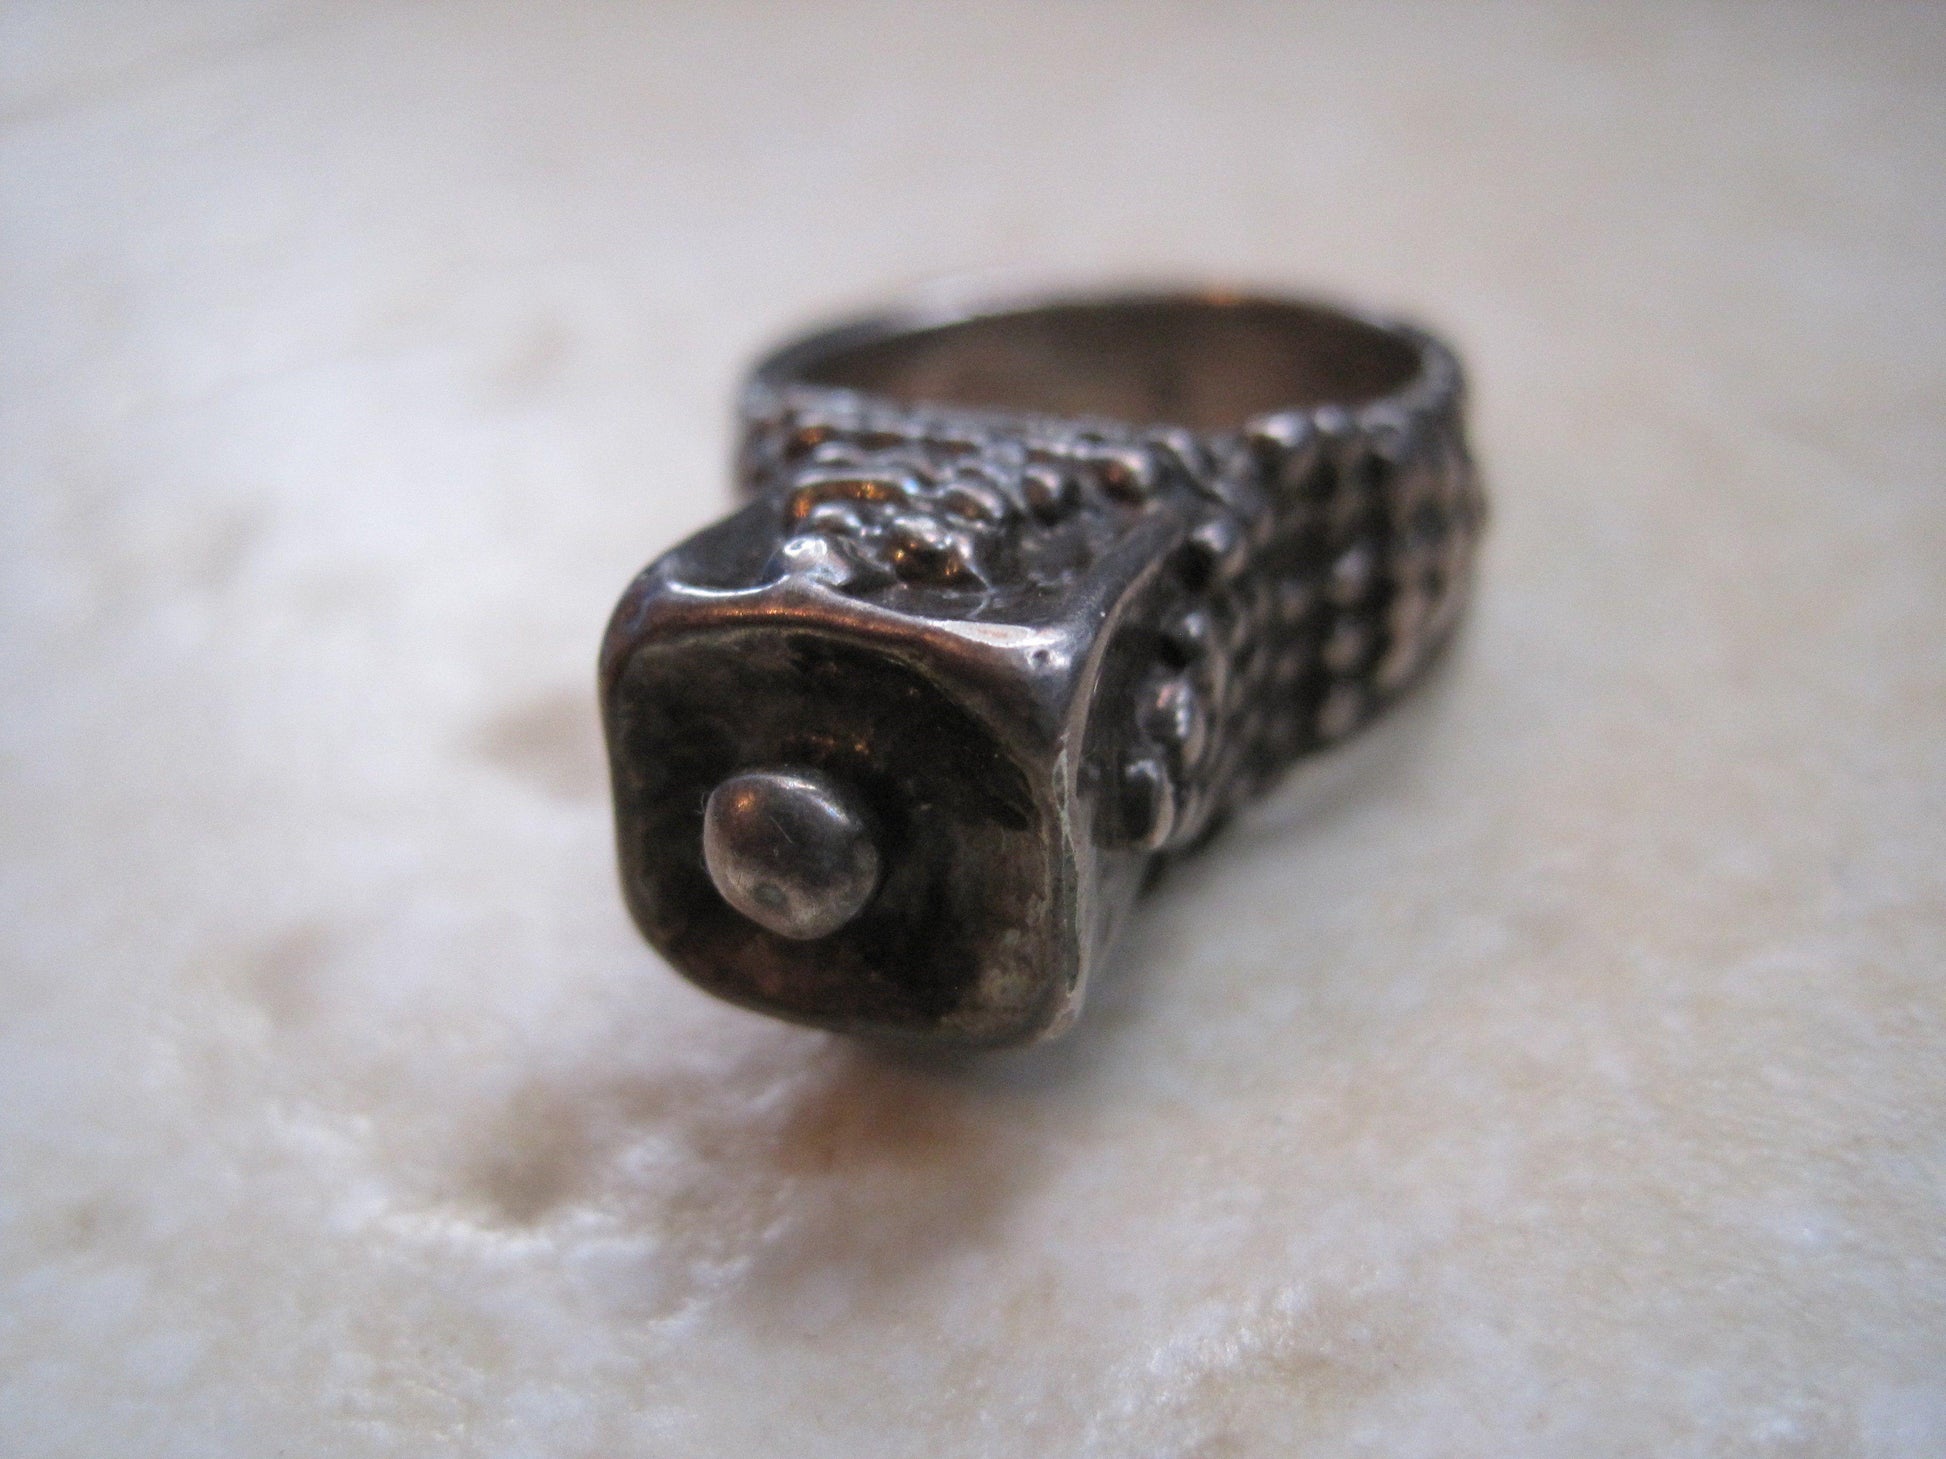 Vintage Bedouin Ring - Tribal Silver Plated Tower Ring - Size 8 - Anteeka